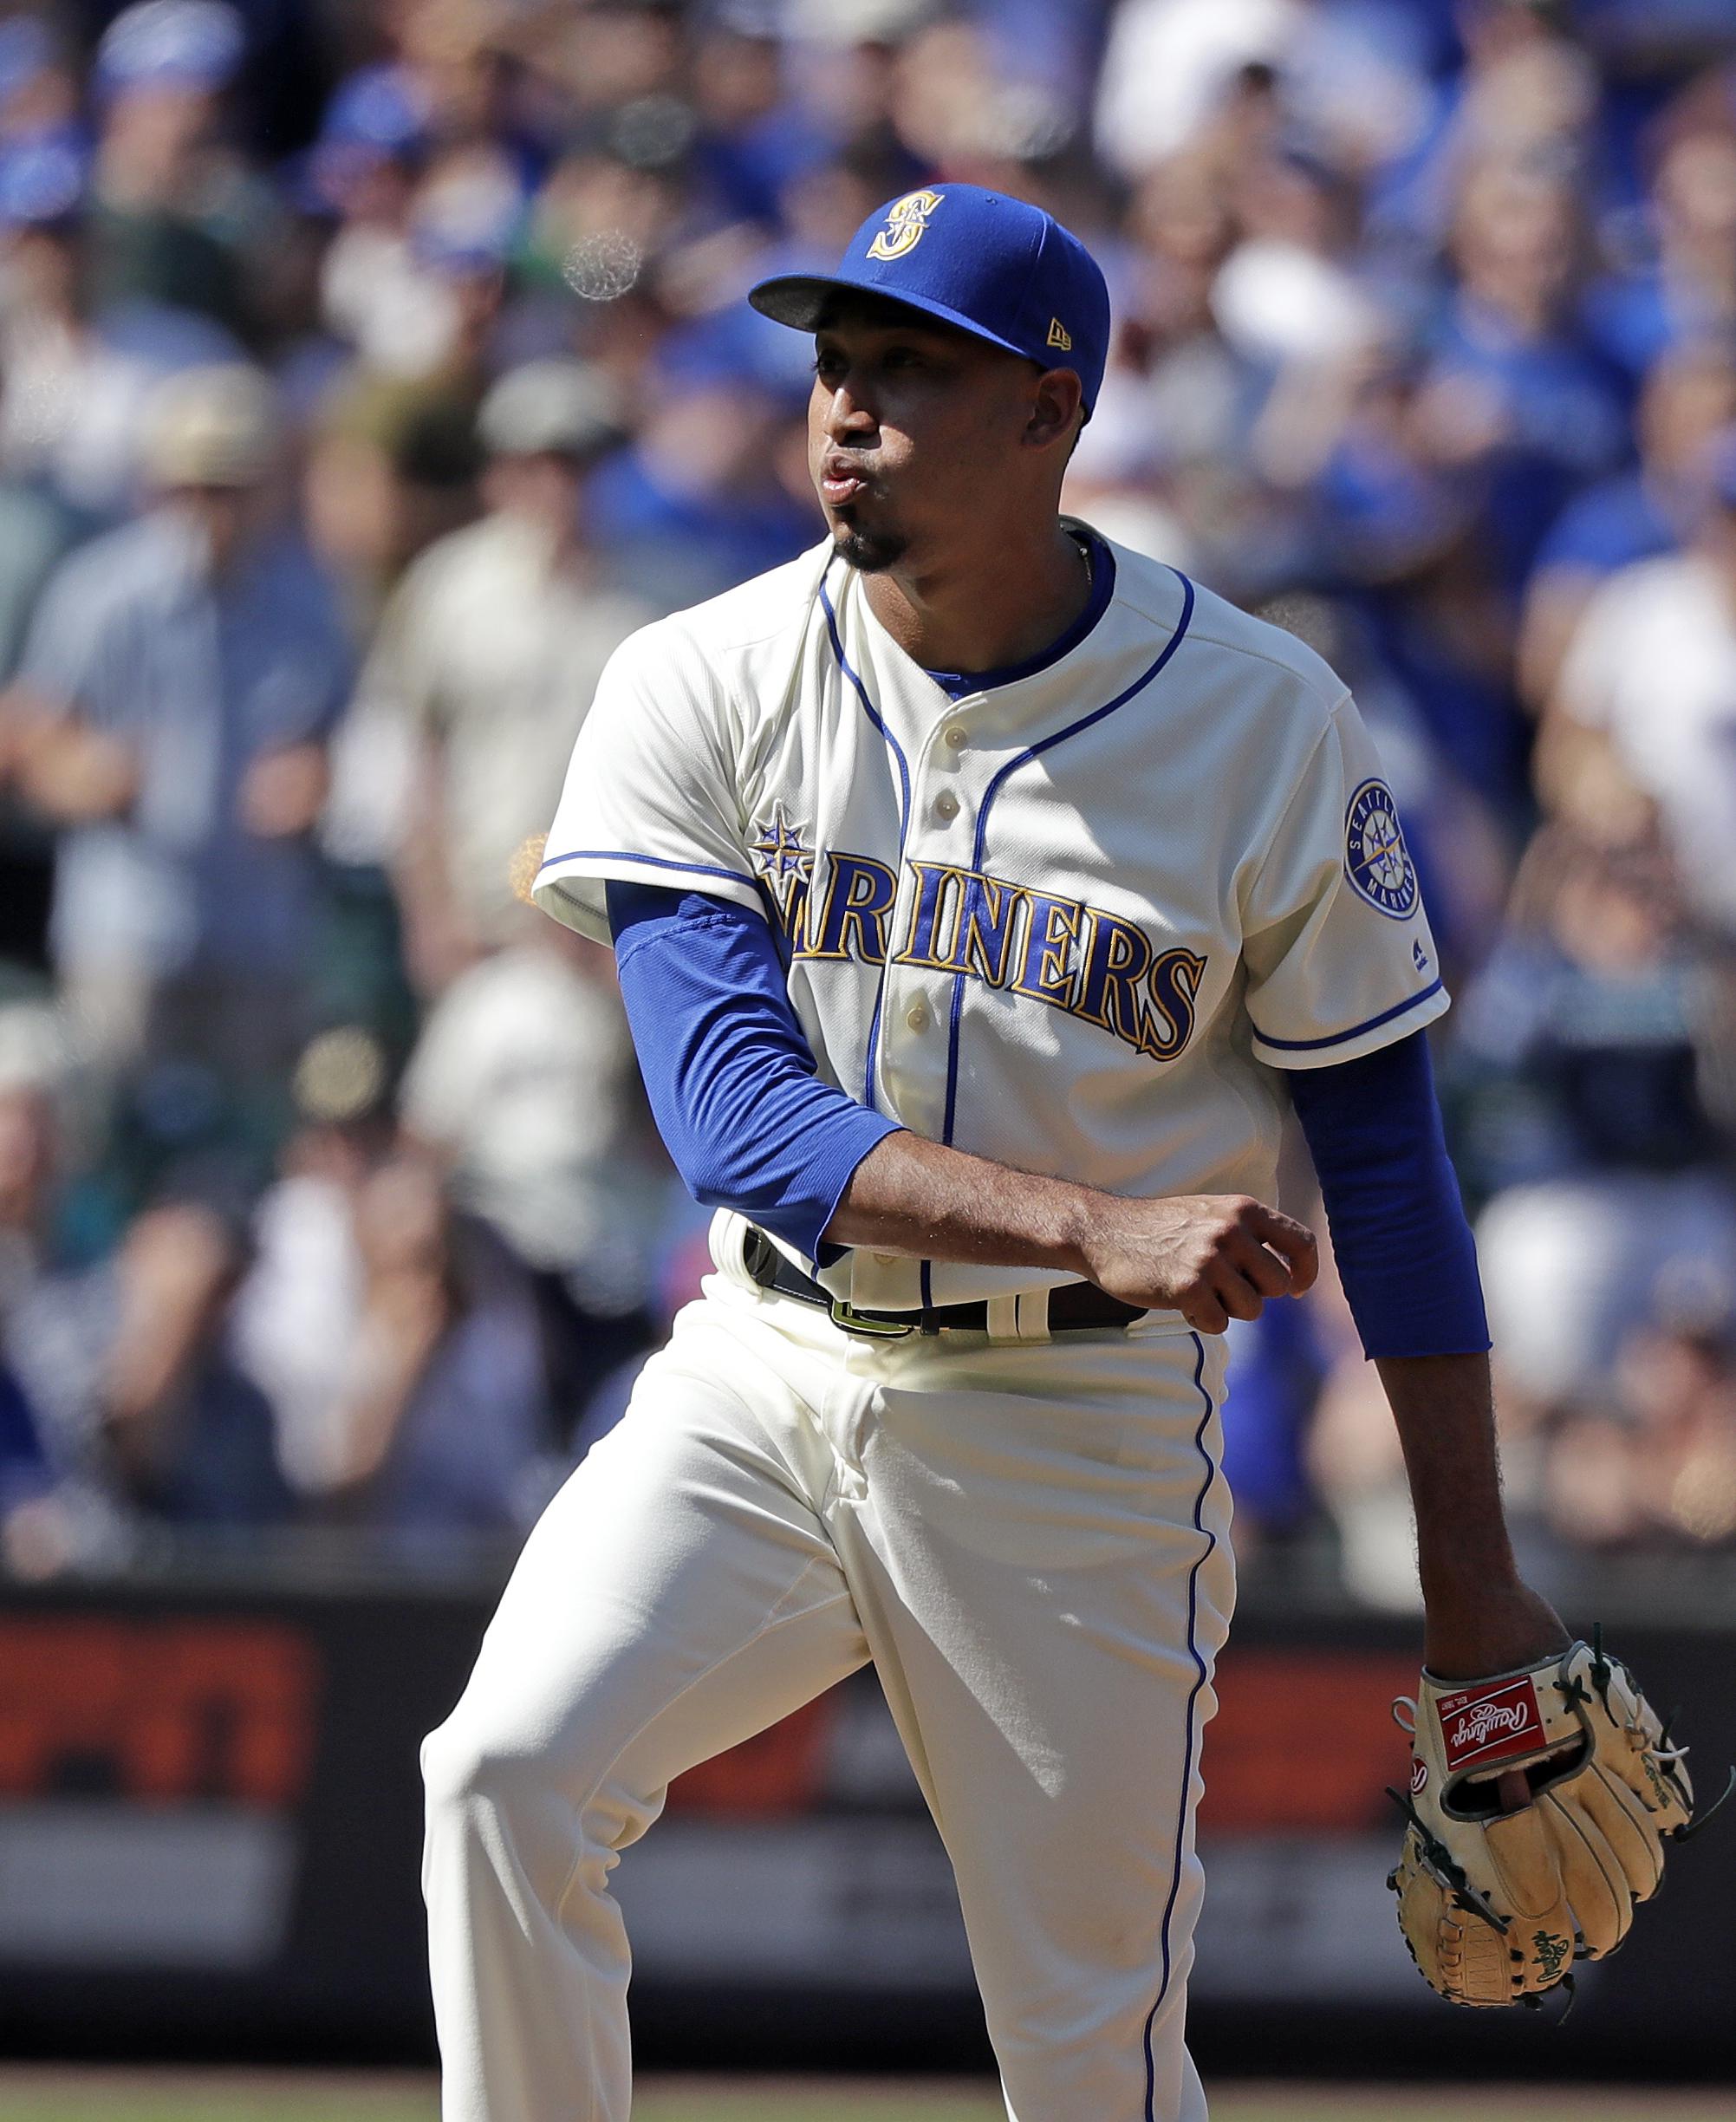 2017 in Review: Edwin Díaz, by Mariners PR